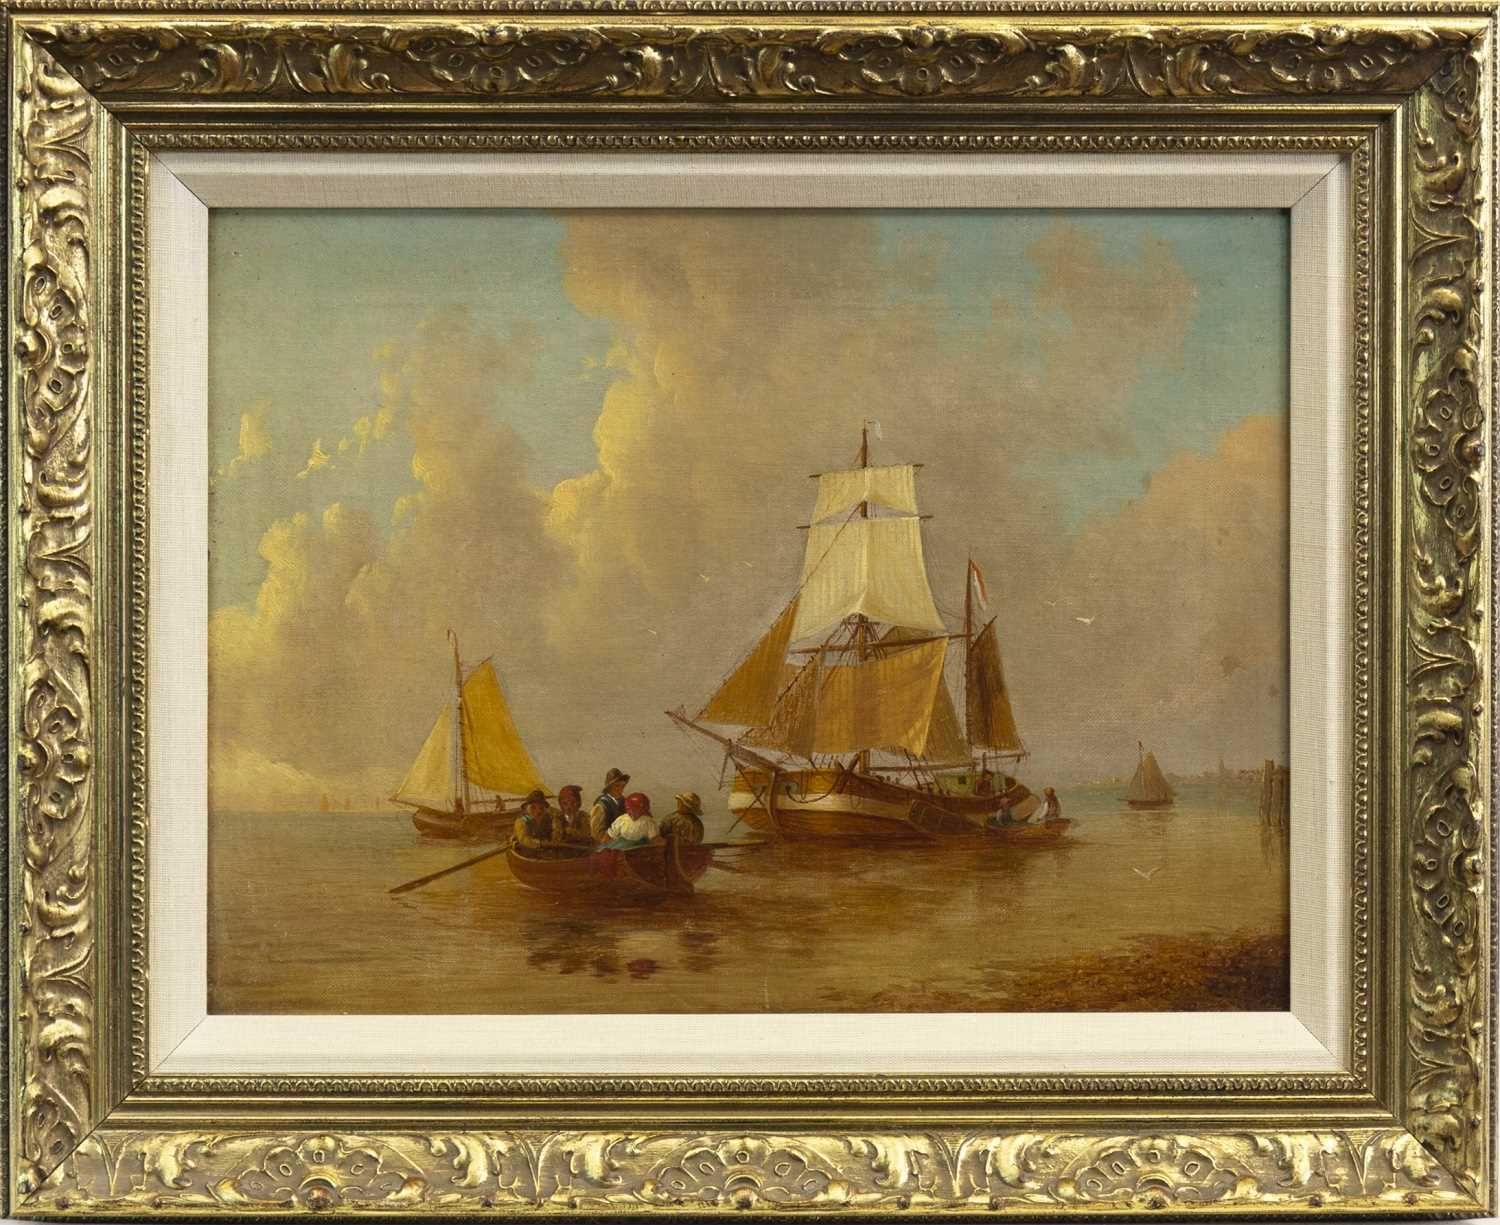 Lot 709 - BOATS IN CALM WATERS, AN OIL